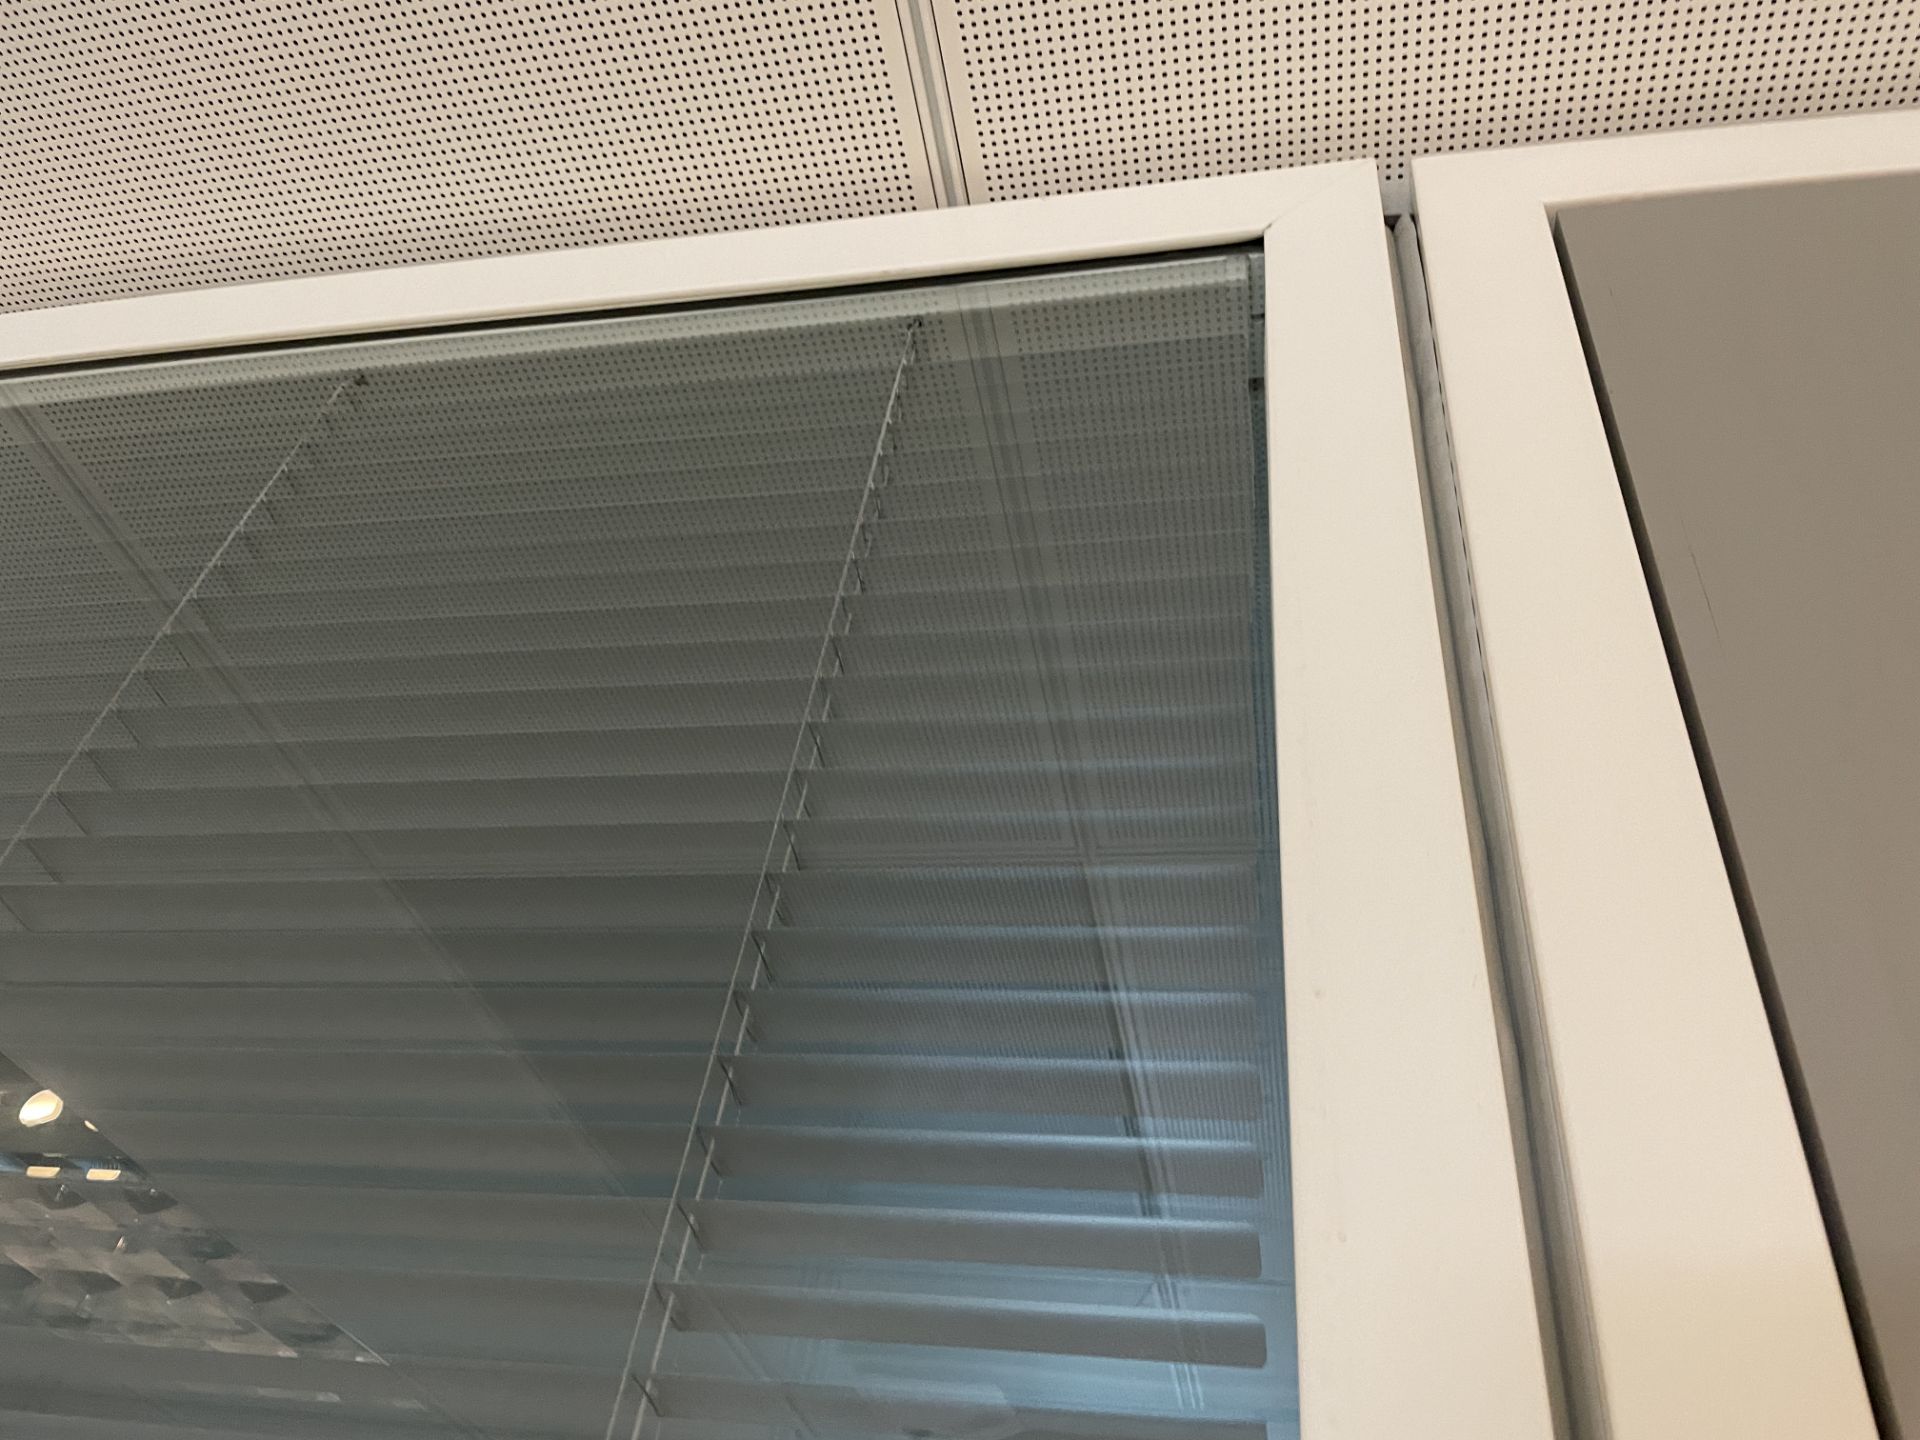 4 x Partition Panels With Privacy Blinds - Each Measures W265 x W100cm - Ref: ED157 - To Be Removed - Image 11 of 13